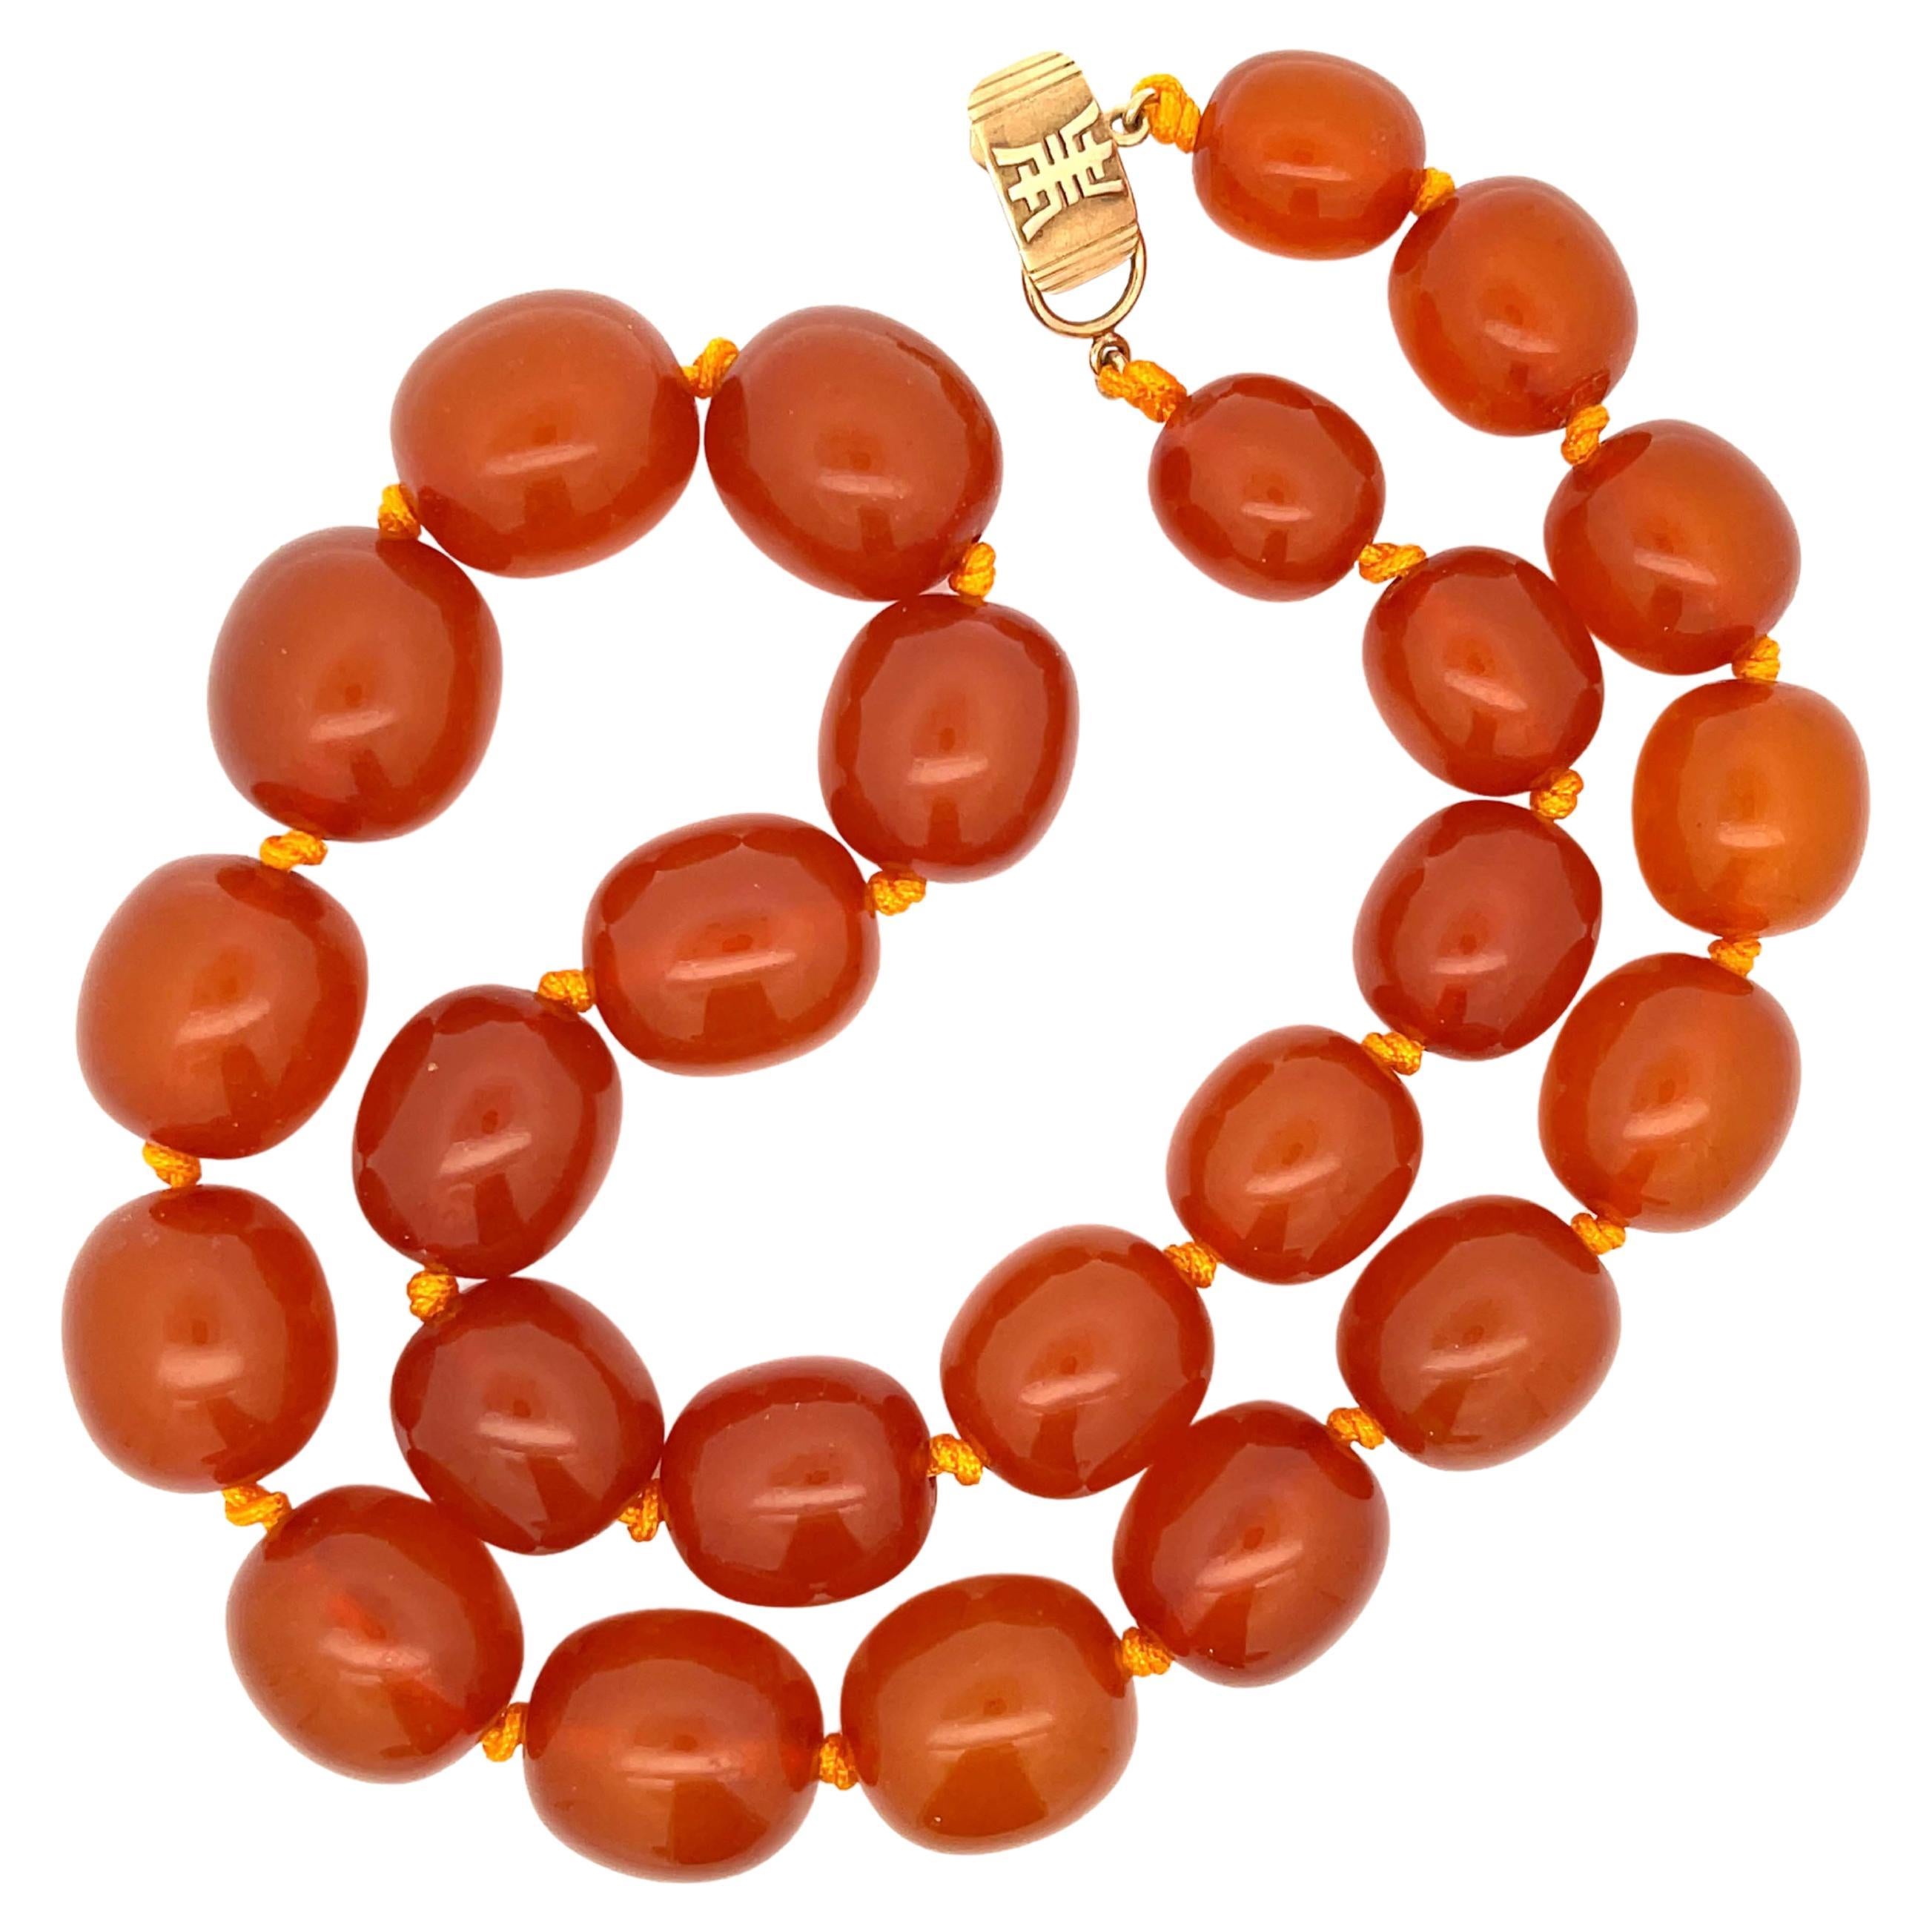 Rare Mings Hawaii Large Amber Bead Strand Necklace